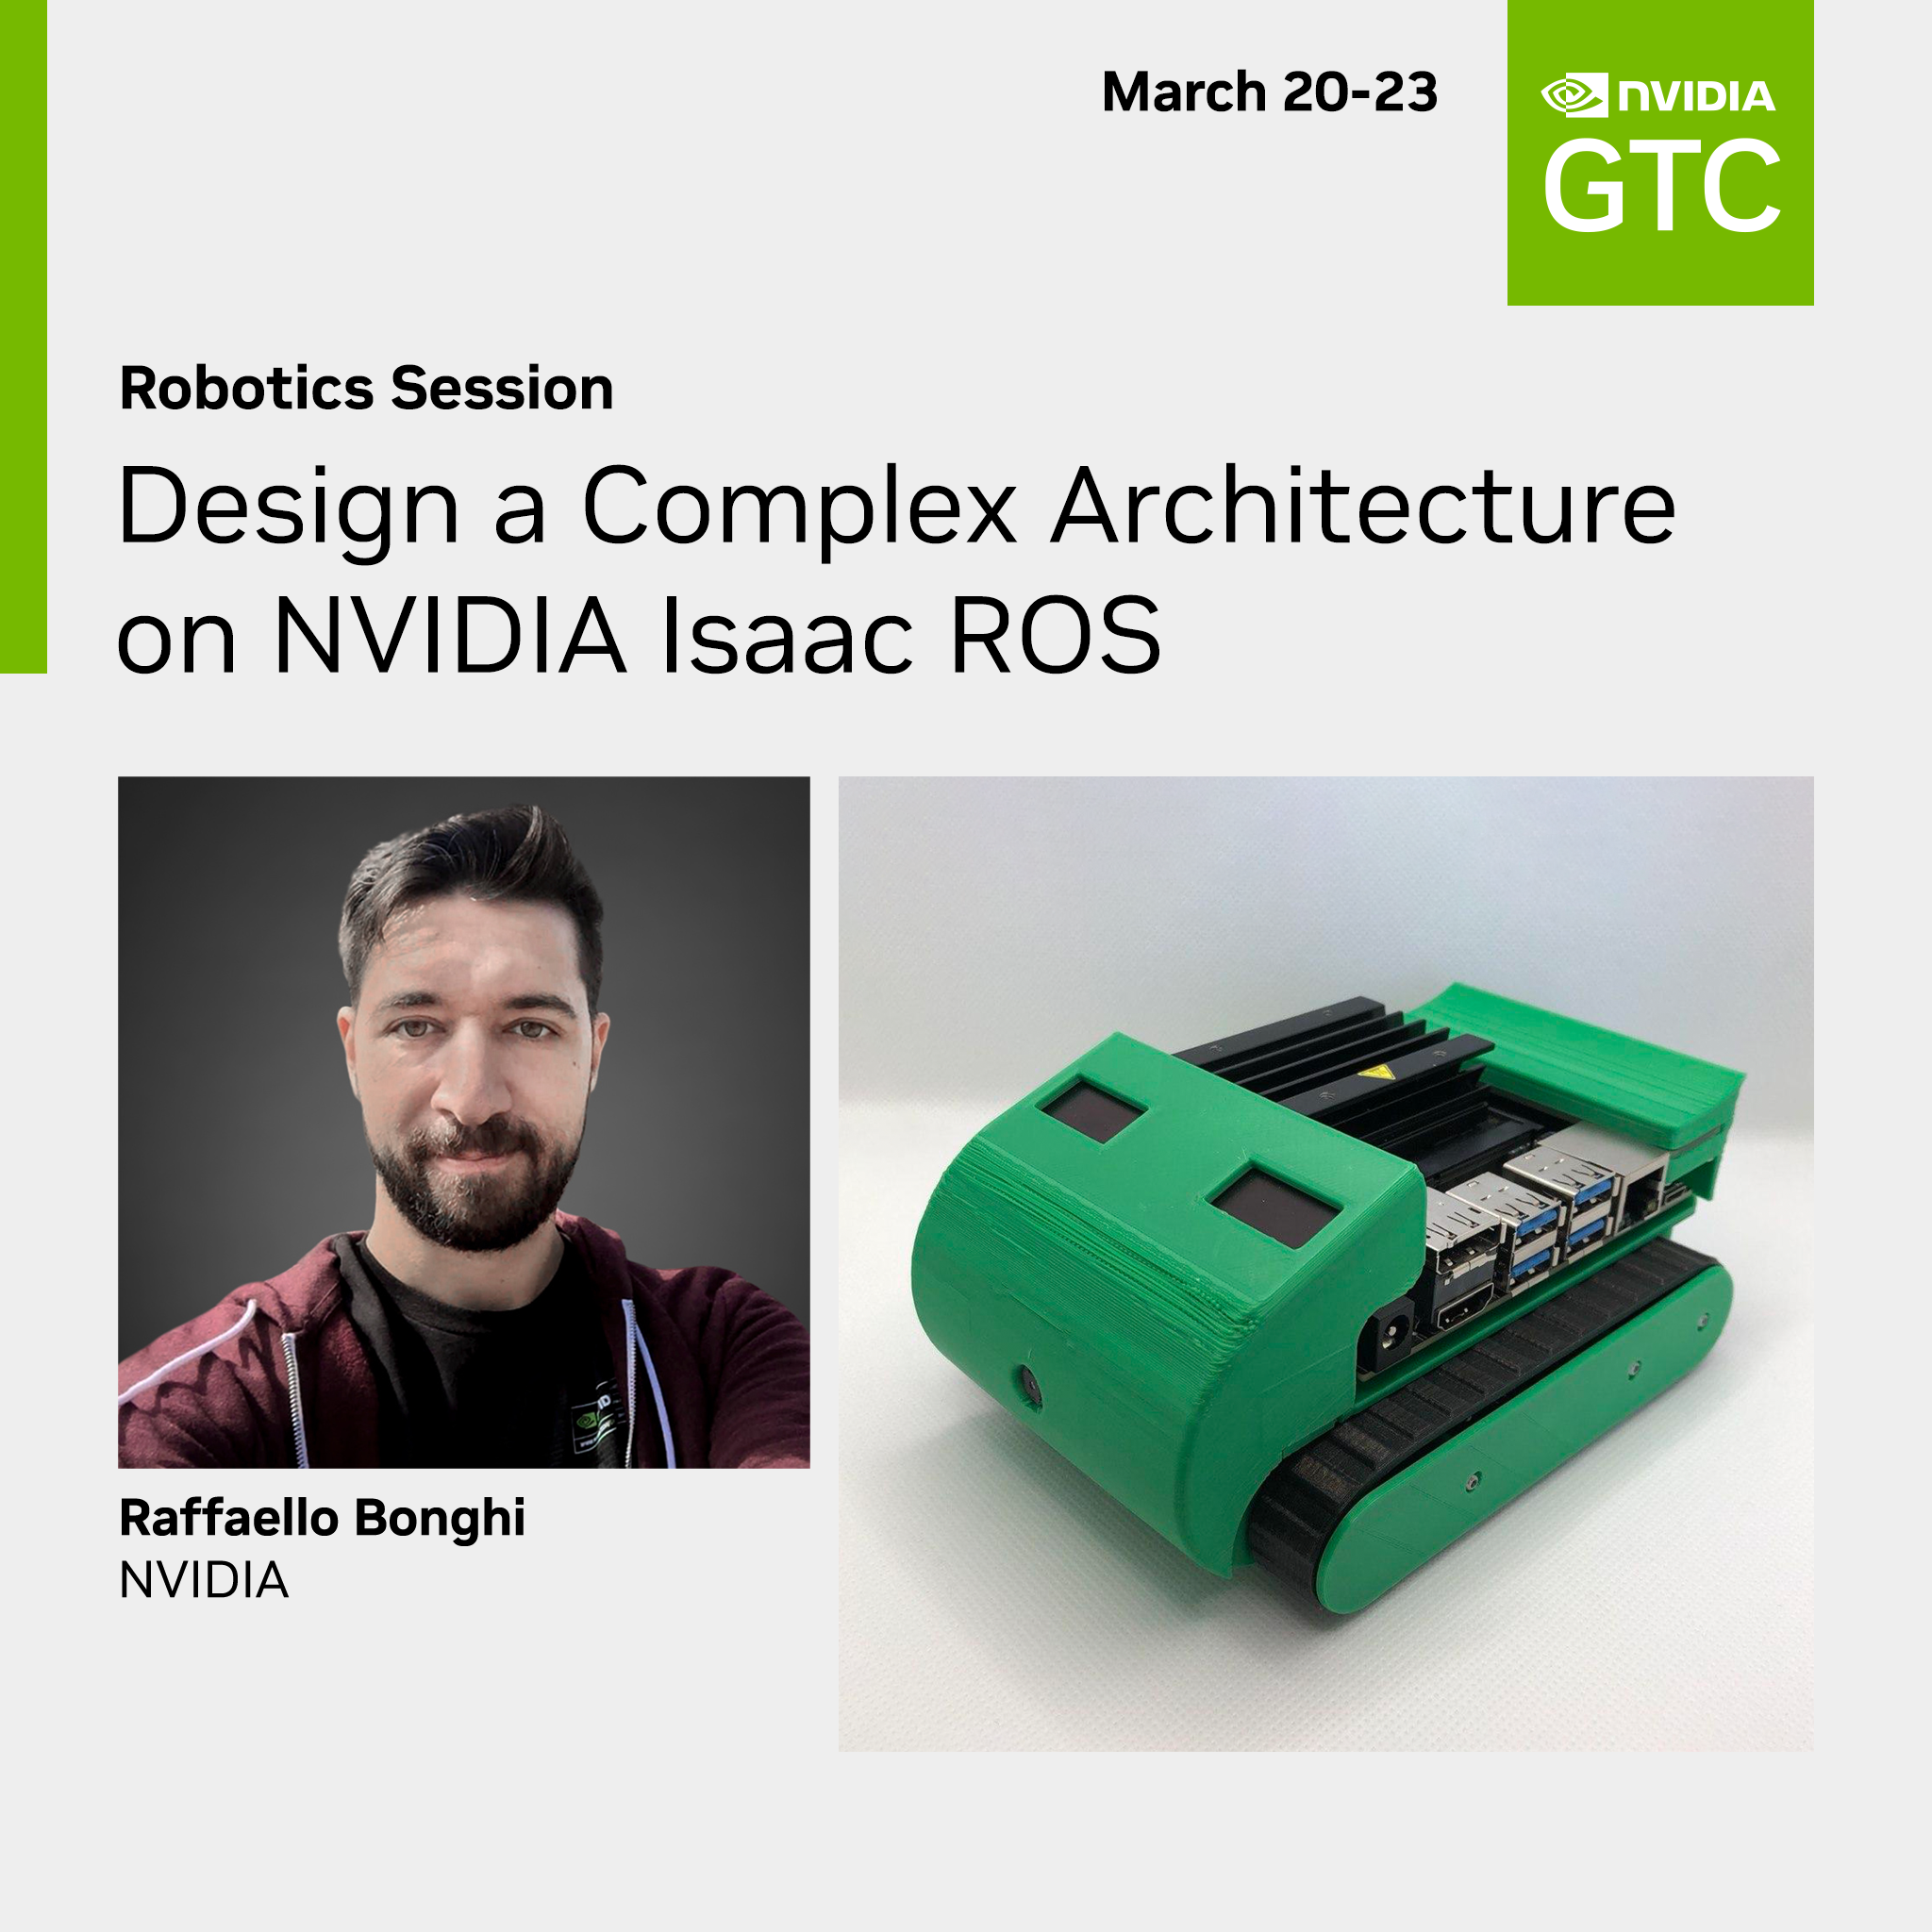 Design a Complex Architecture on NVIDIA Isaac ROS